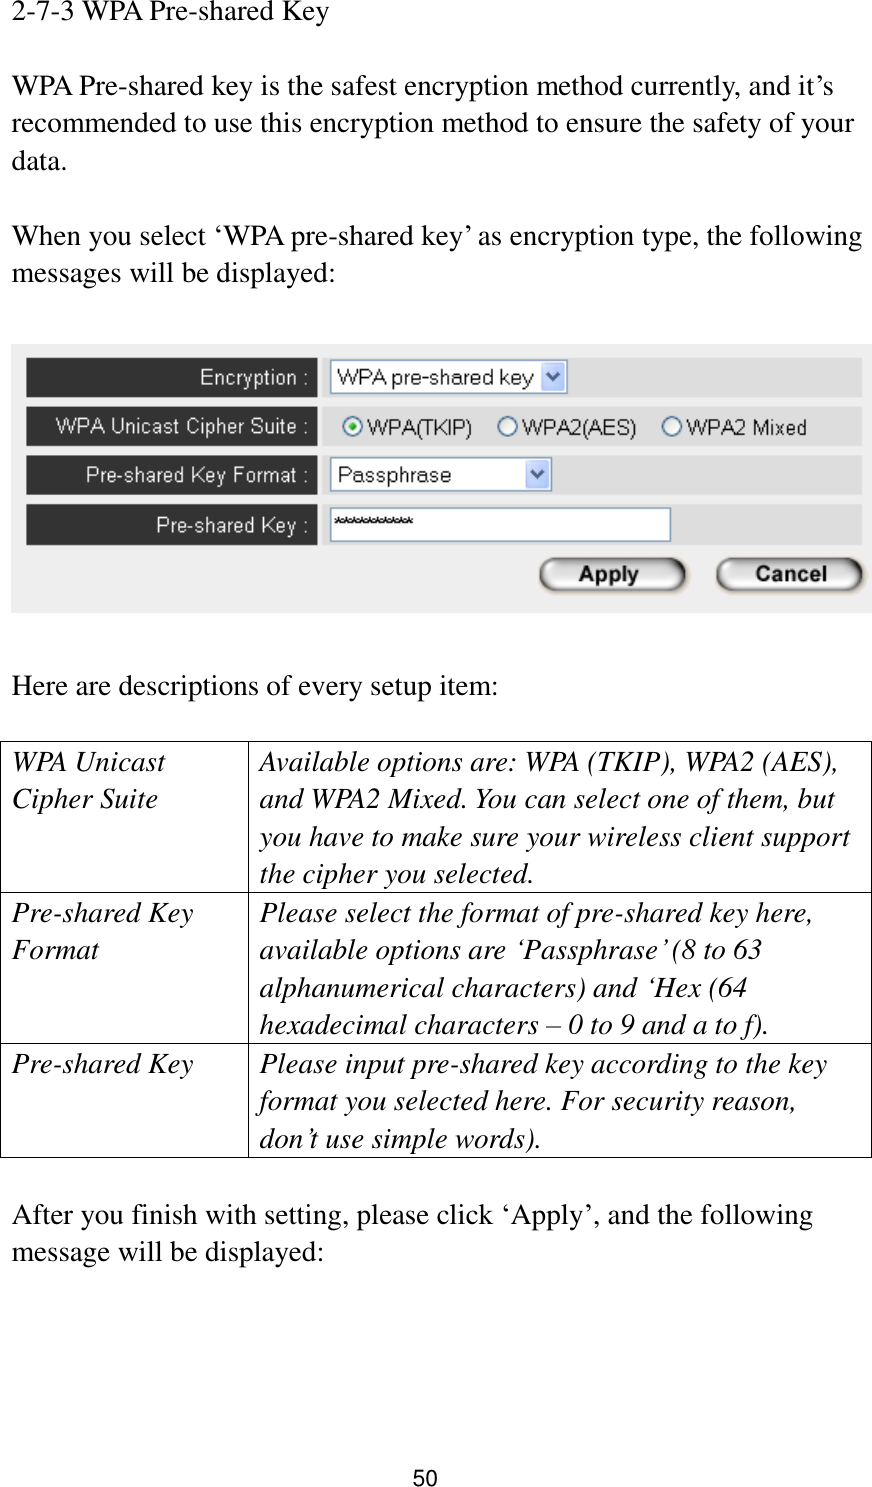 50 2-7-3 WPA Pre-shared Key  WPA Pre-shared key is the safest encryption method currently, and it‟s recommended to use this encryption method to ensure the safety of your data.  When you select „WPA pre-shared key‟ as encryption type, the following messages will be displayed:    Here are descriptions of every setup item:  WPA Unicast Cipher Suite  Available options are: WPA (TKIP), WPA2 (AES), and WPA2 Mixed. You can select one of them, but you have to make sure your wireless client support the cipher you selected. Pre-shared Key Format Please select the format of pre-shared key here, available options are „Passphrase‟ (8 to 63 alphanumerical characters) and „Hex (64 hexadecimal characters – 0 to 9 and a to f). Pre-shared Key Please input pre-shared key according to the key format you selected here. For security reason, don‟t use simple words).  After you finish with setting, please click „Apply‟, and the following message will be displayed:  